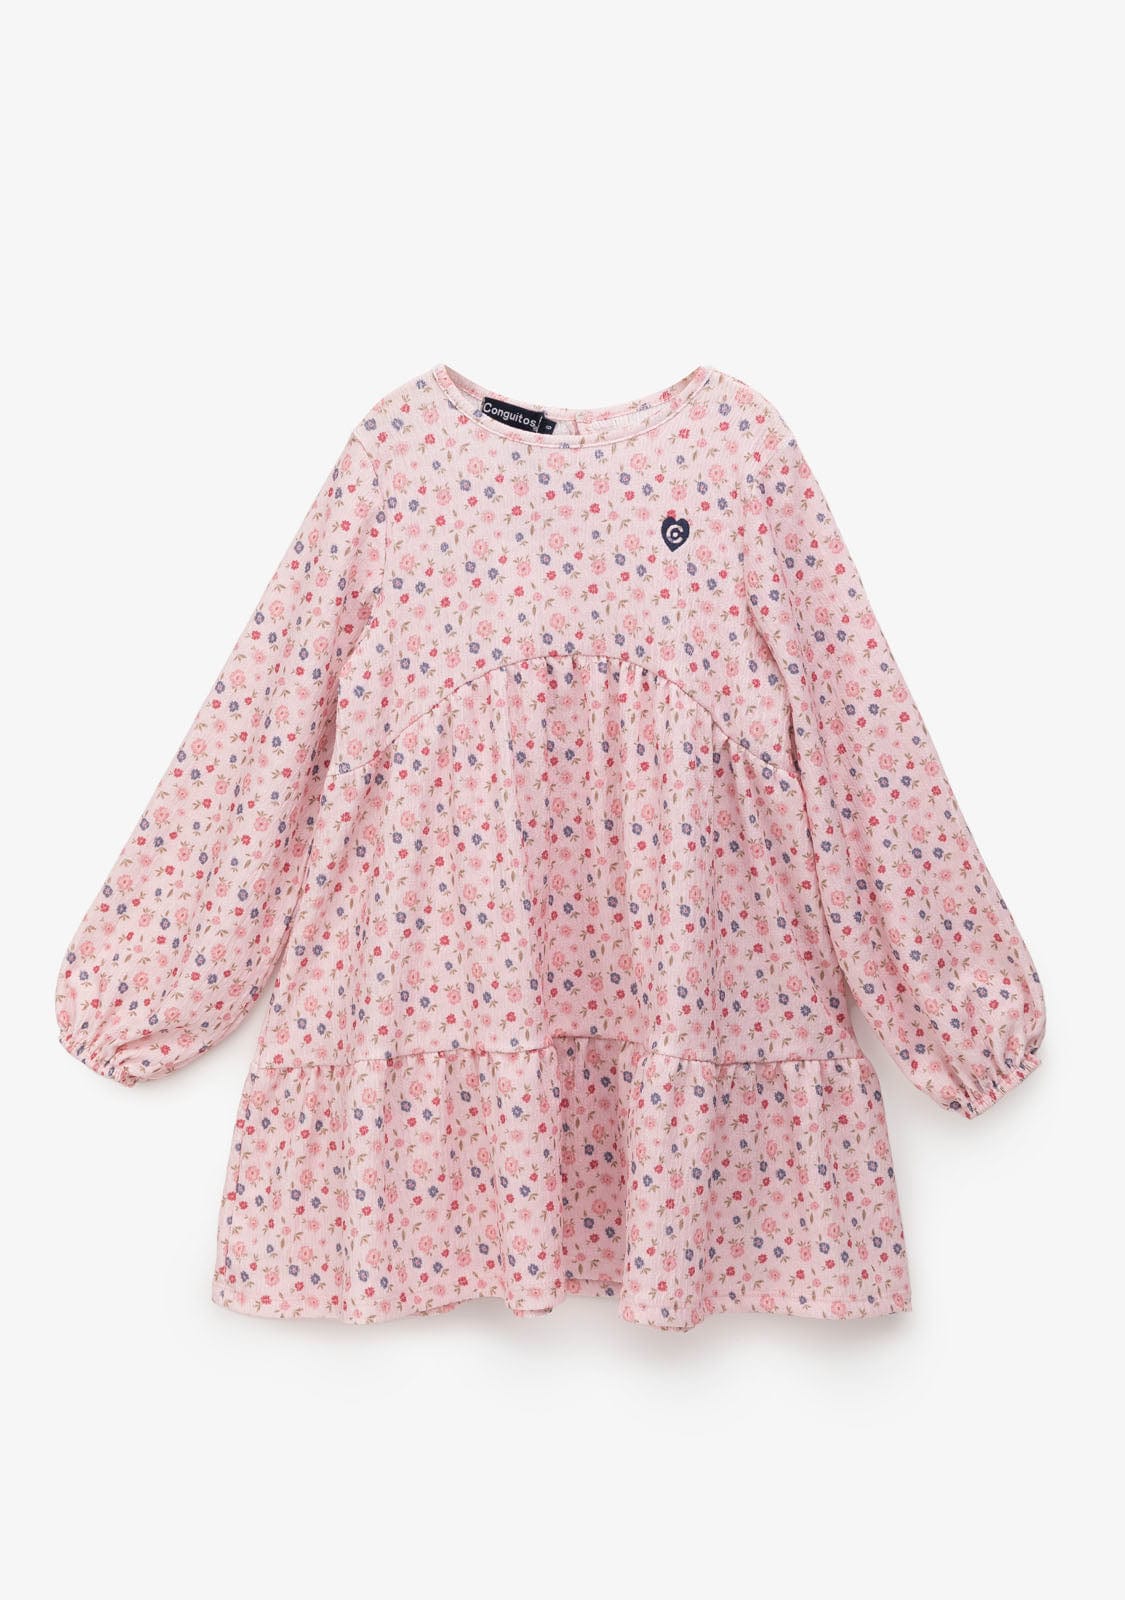 CONGUITOS TEXTIL Clothing Girl's Pink Print Flowers Dress